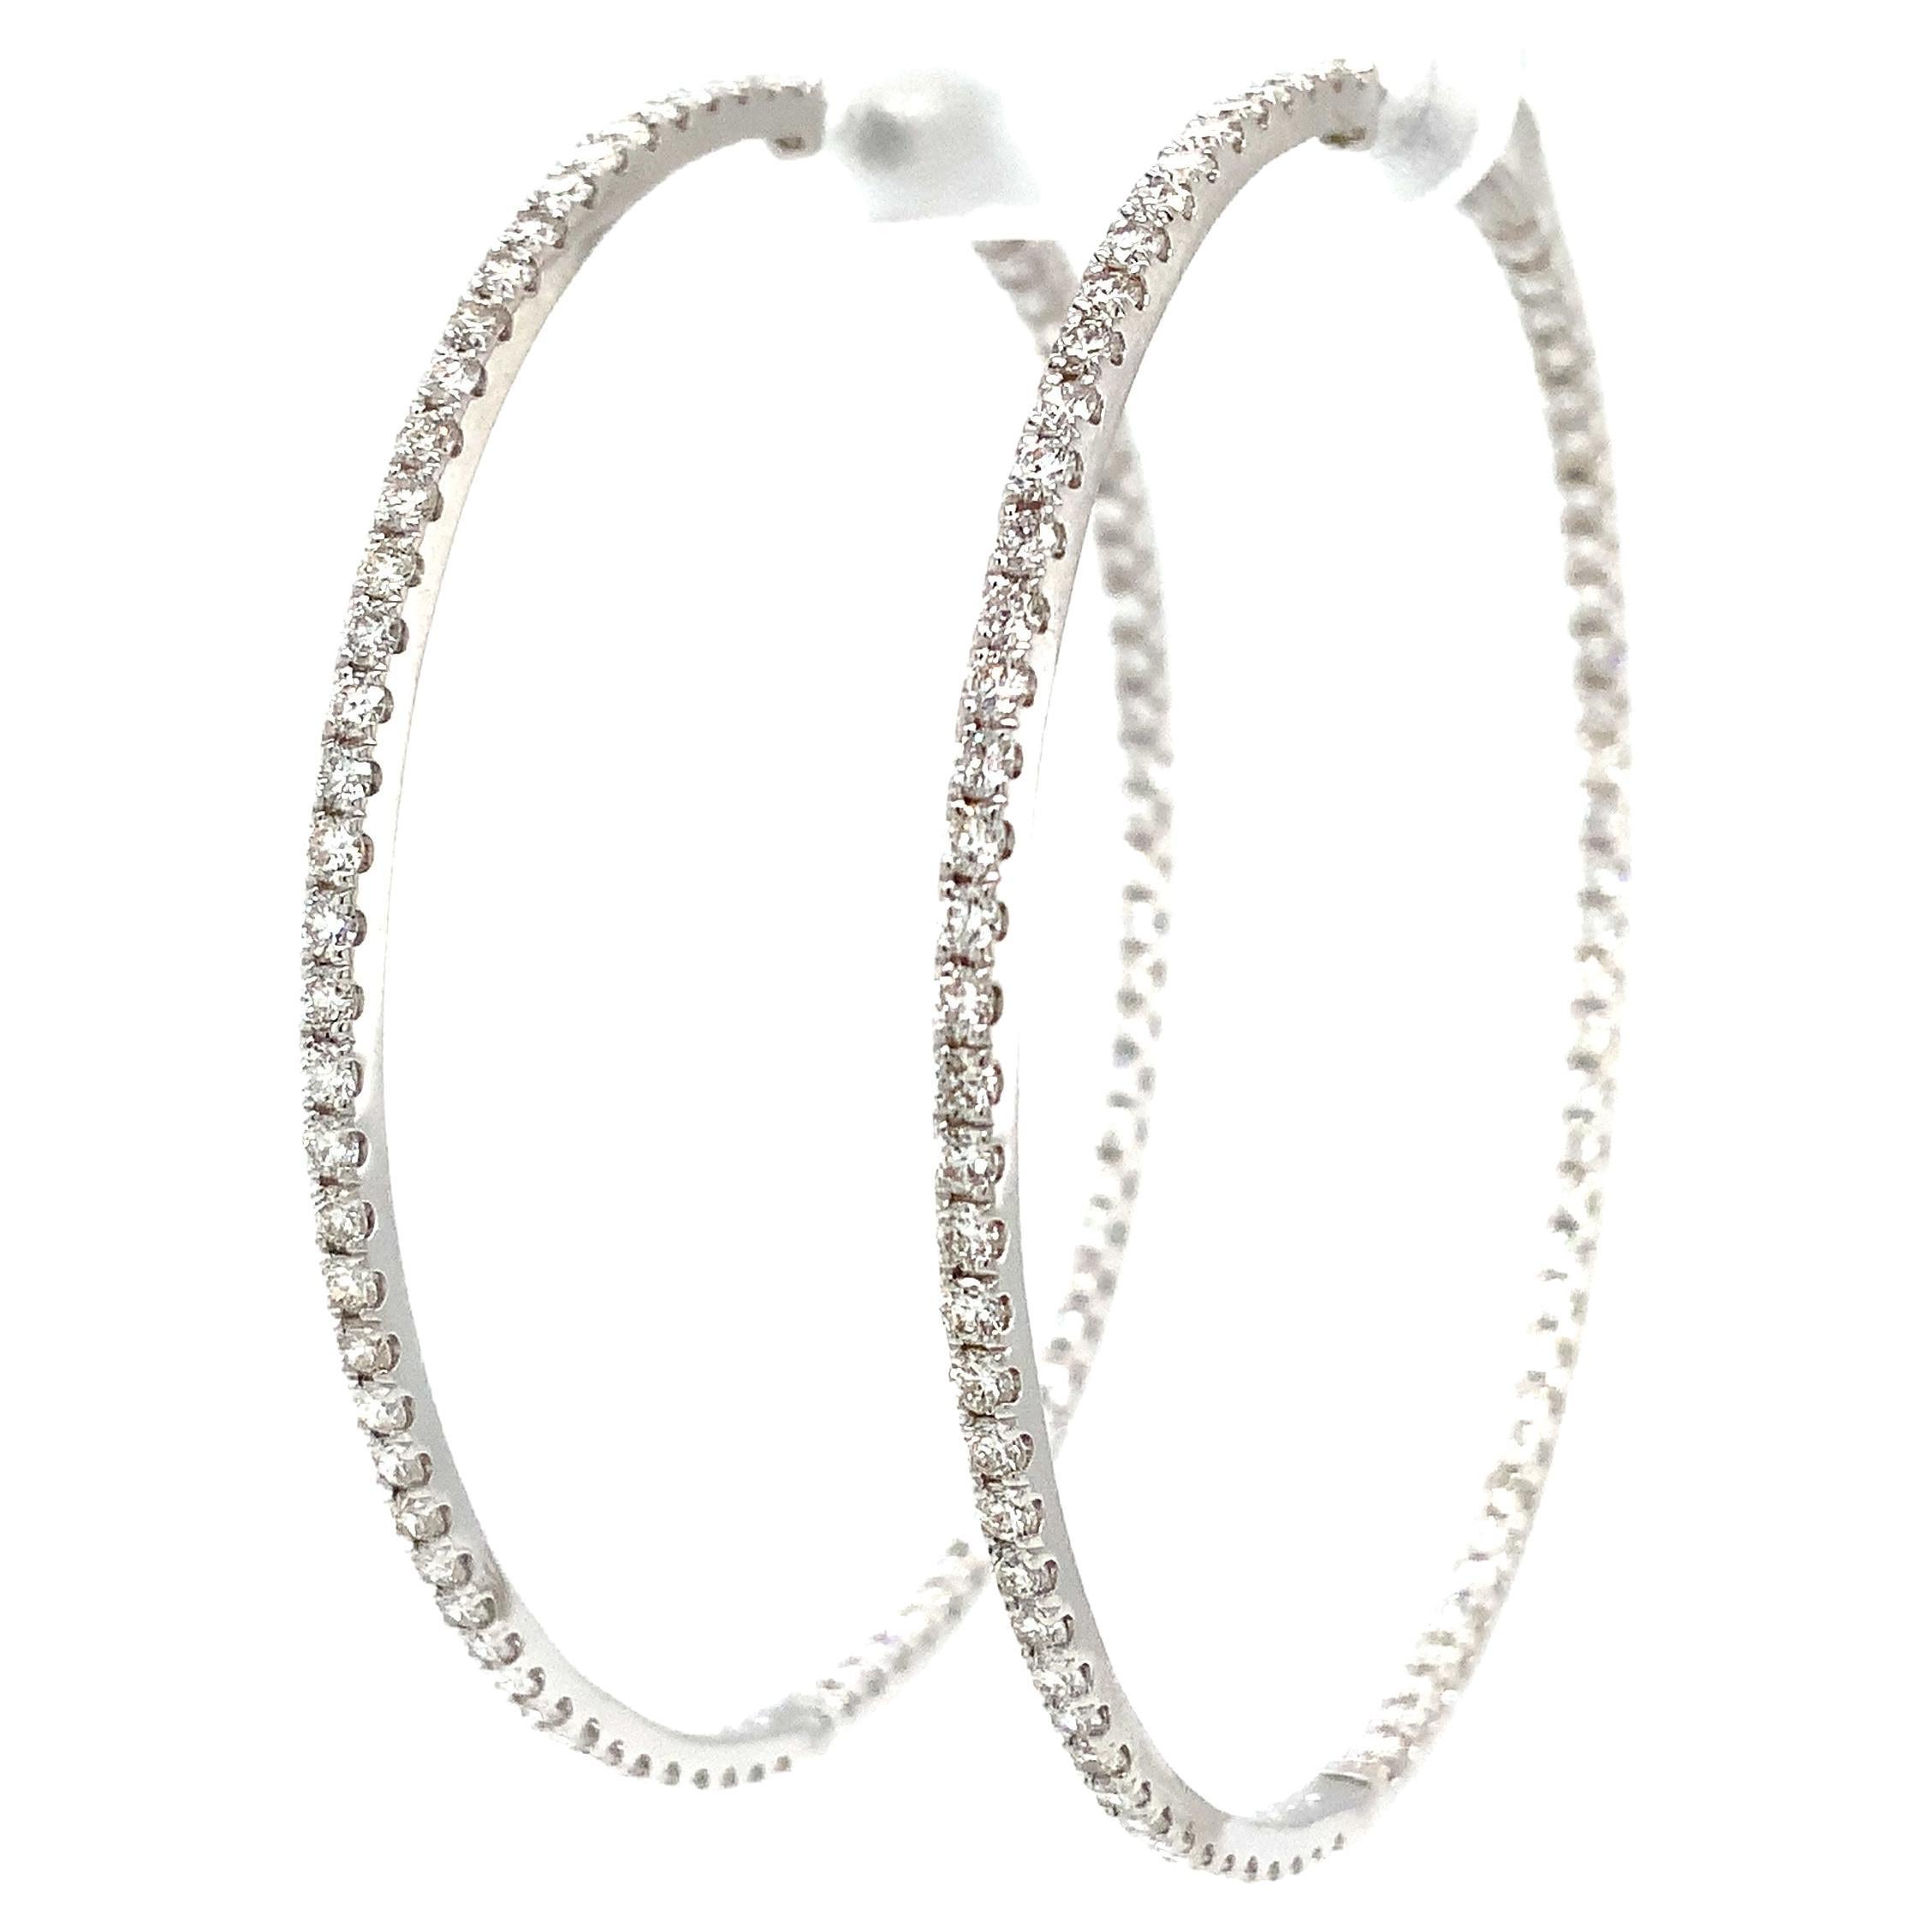 Roman + Jules Two Inch Diameter Round Shared Prong Diamond Hoop Set in 14K White Gold Post with Locking clutch Back for Security.  These Chicque Hoops will make you Look and Feel Great! Everyone should have a pair of these!
184 Round Diamond =2.00